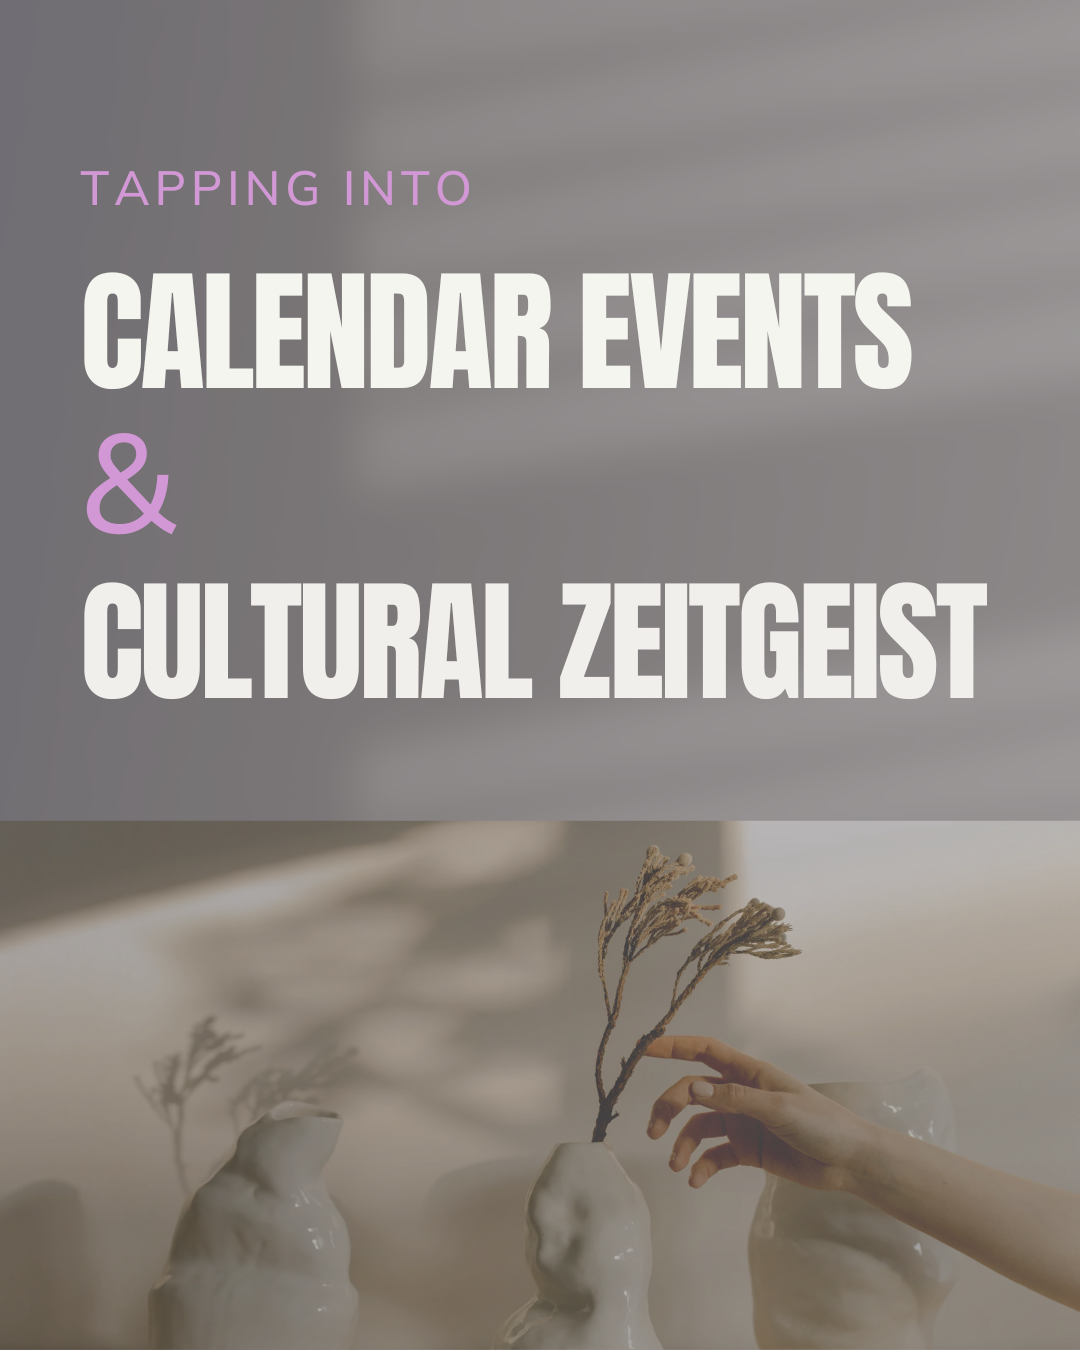 Brand tapping into calendar events and cultural zeitgeist